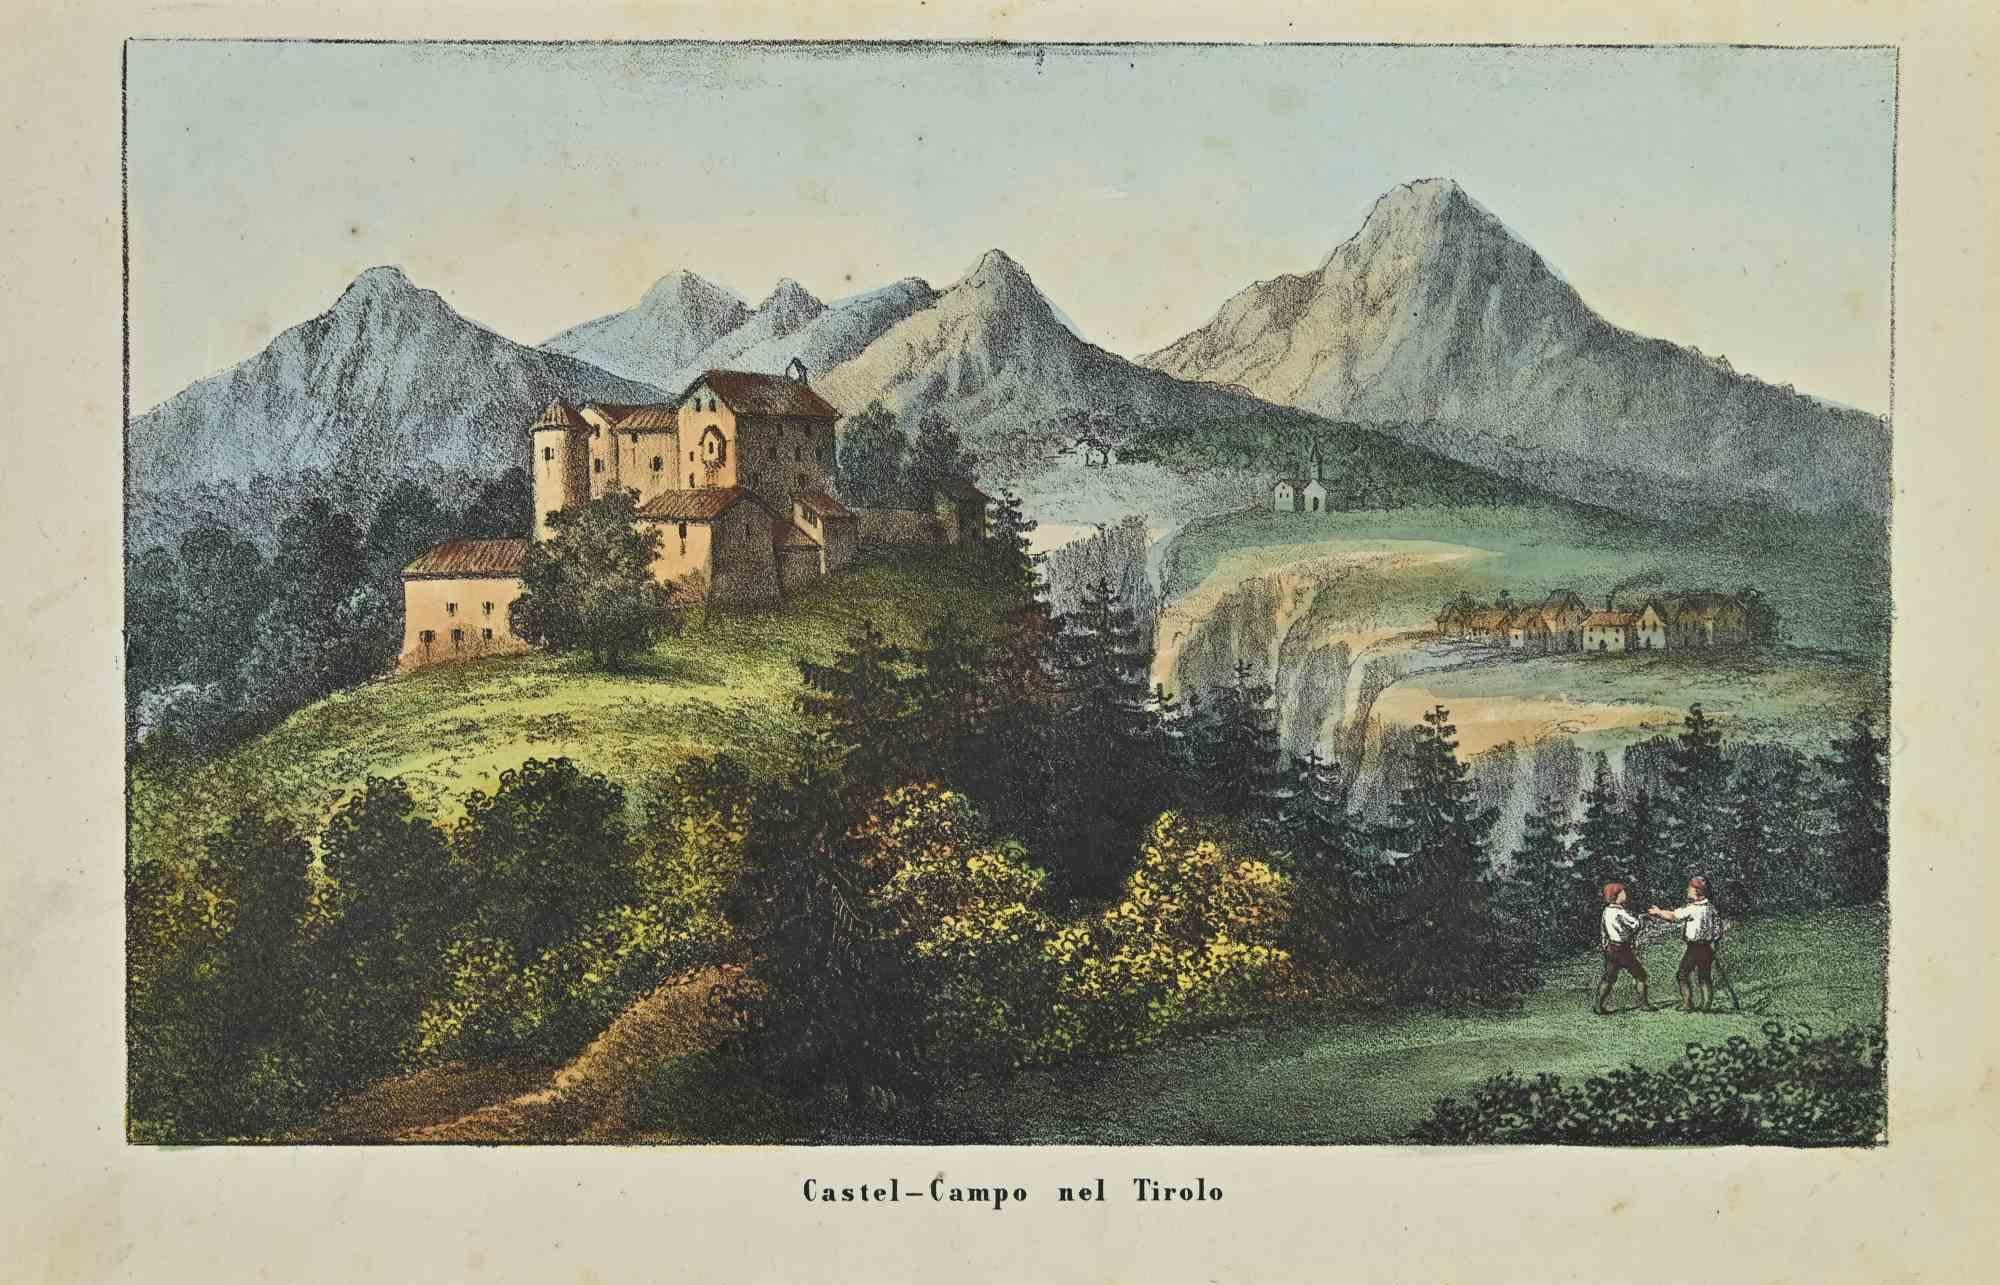 Unknown Figurative Print - Castel-Campo in Tyrol - Lithograph - 1862